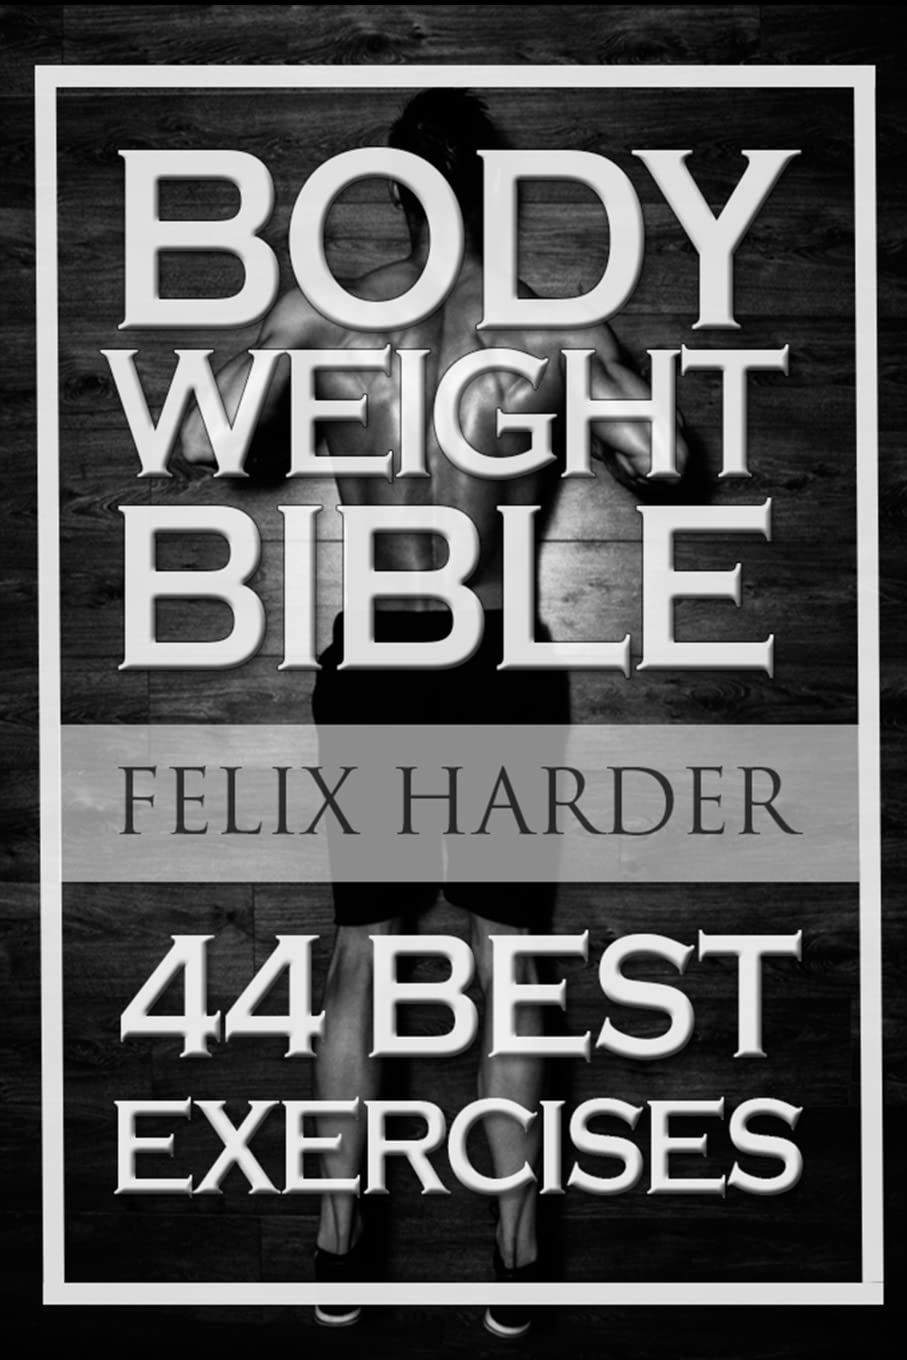 Bodyweight: Bodyweight Bible: 44 Best Exercises To Add Strength And Muscle SureShot Books